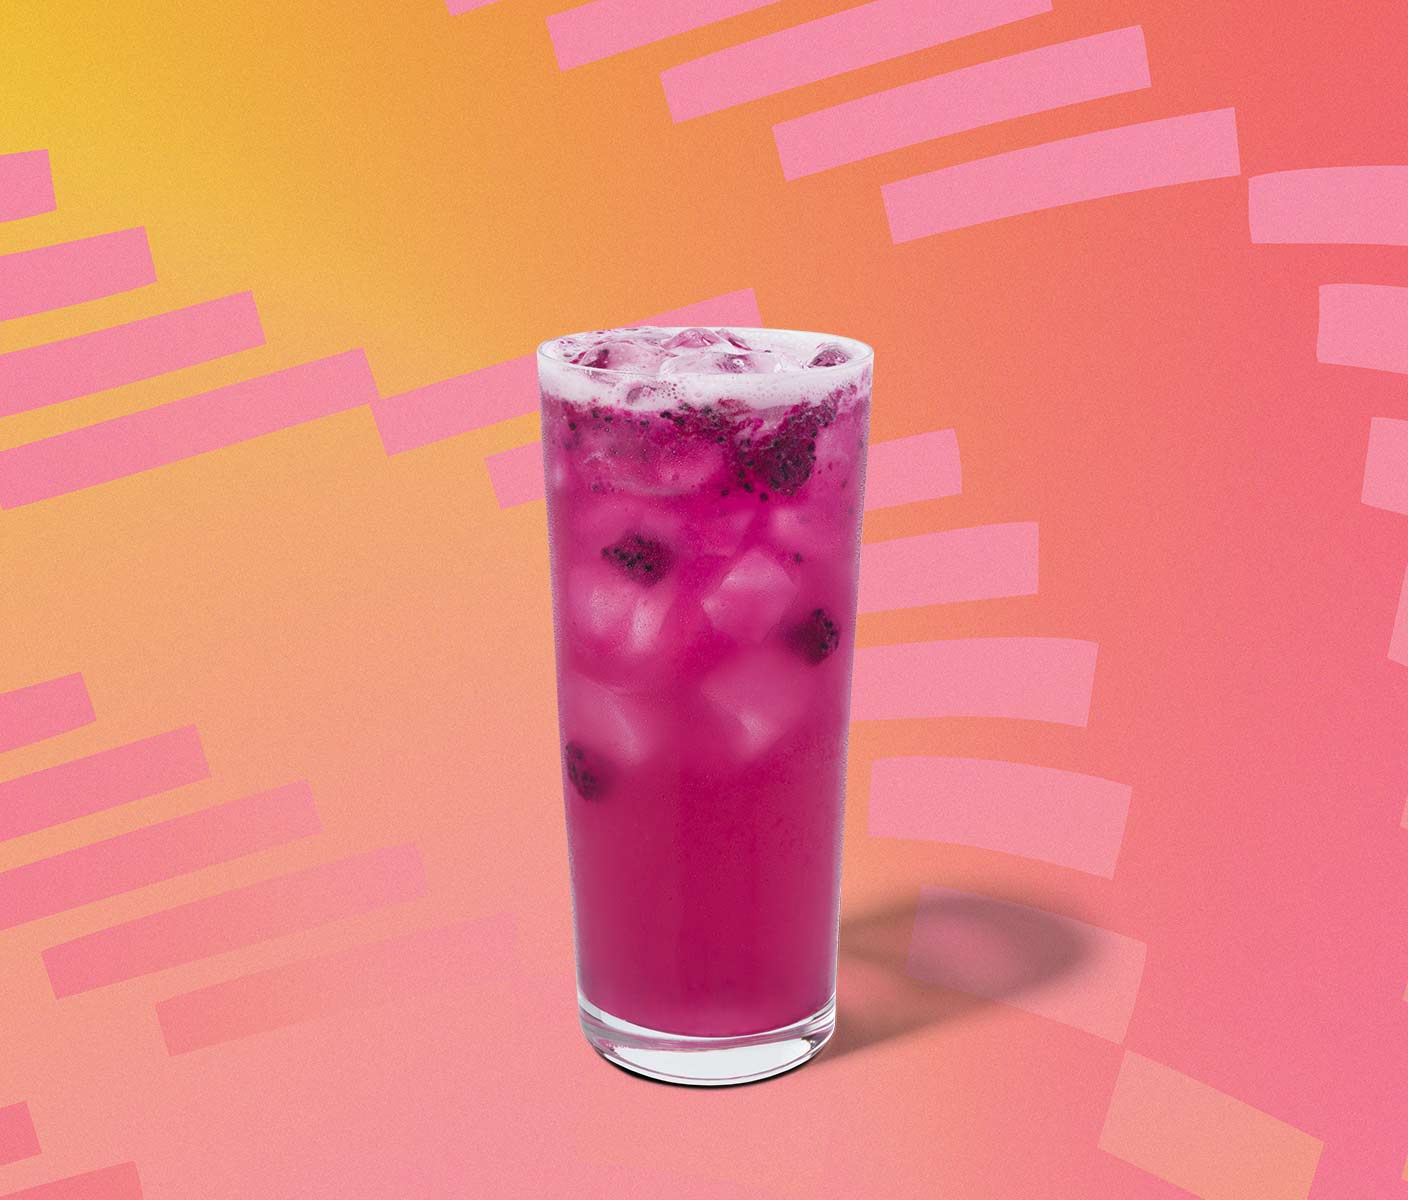 Magenta iced drink with dragonfruit inclusions in a tall glass.